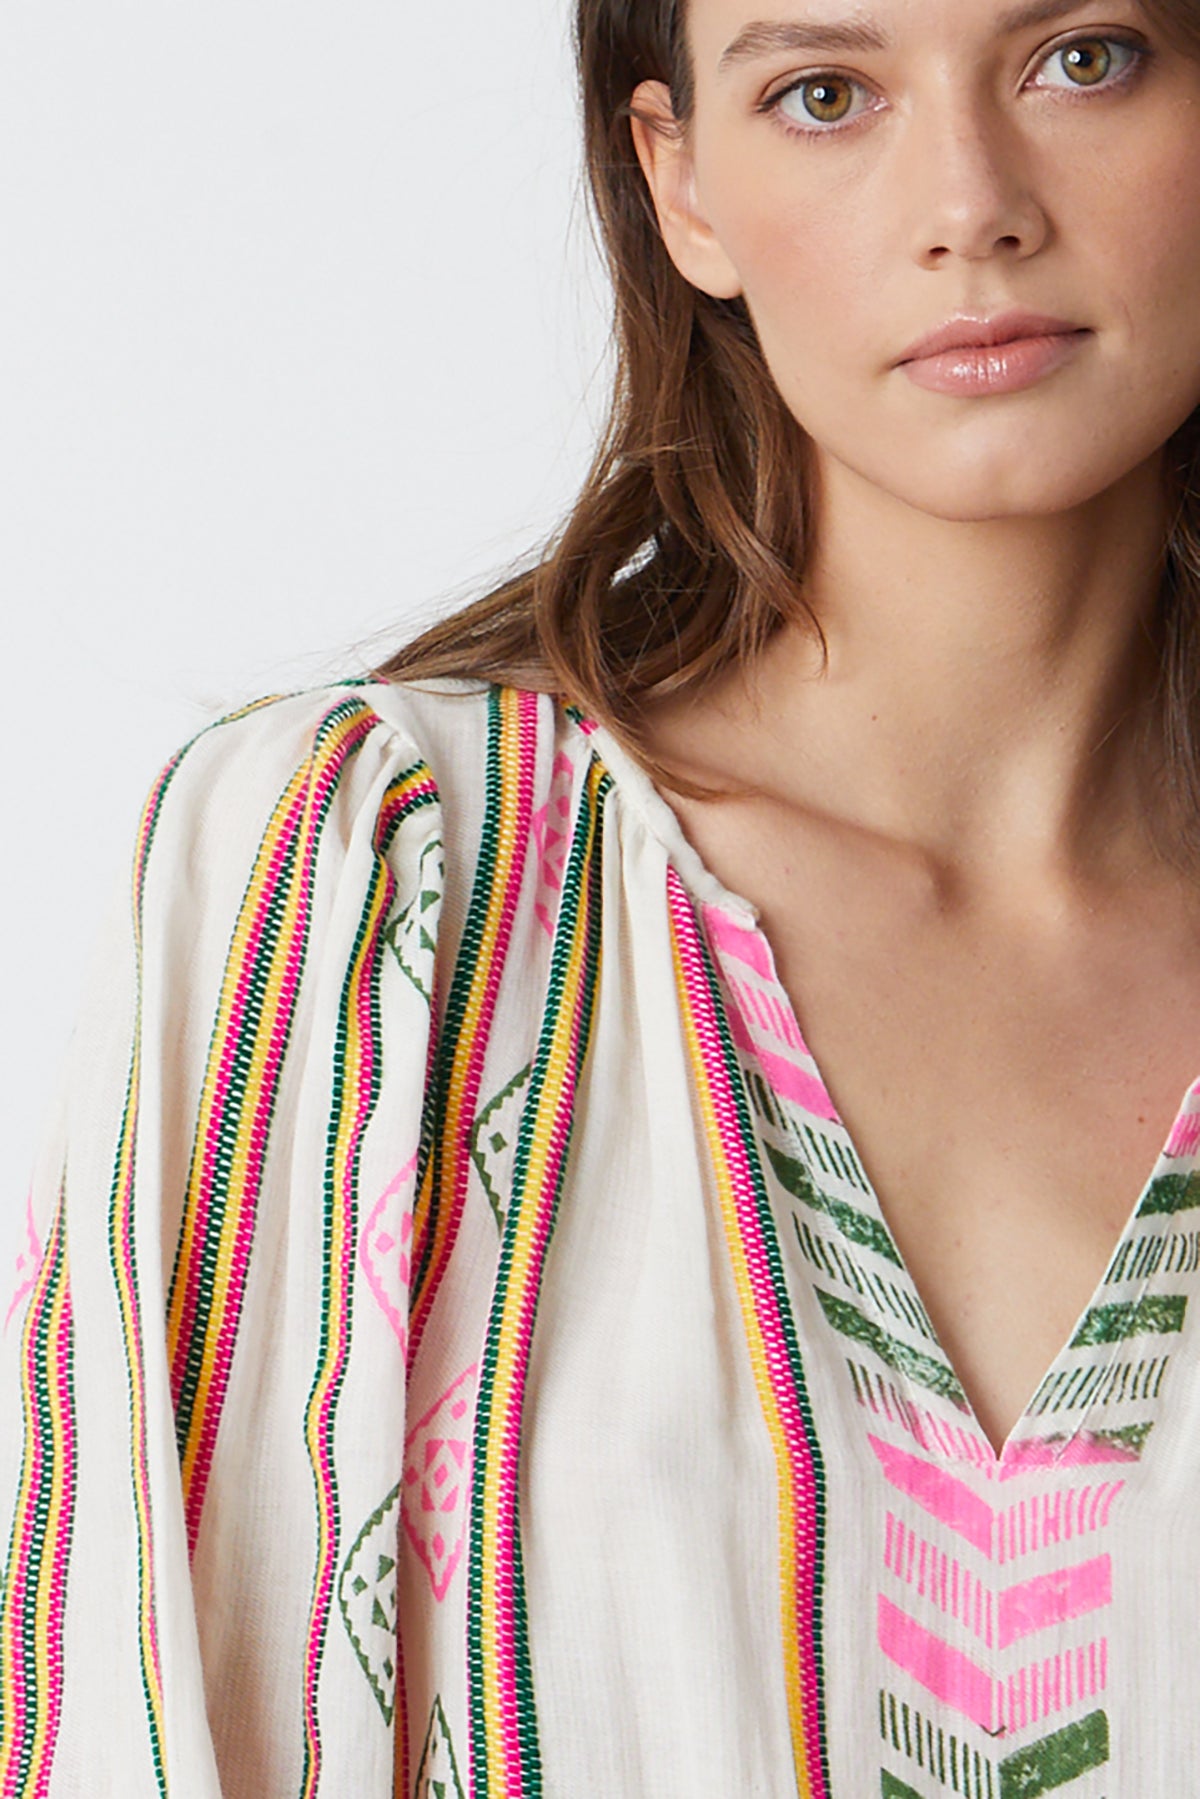   Beth Boho Top in multi colored jacquard print close up front detail 